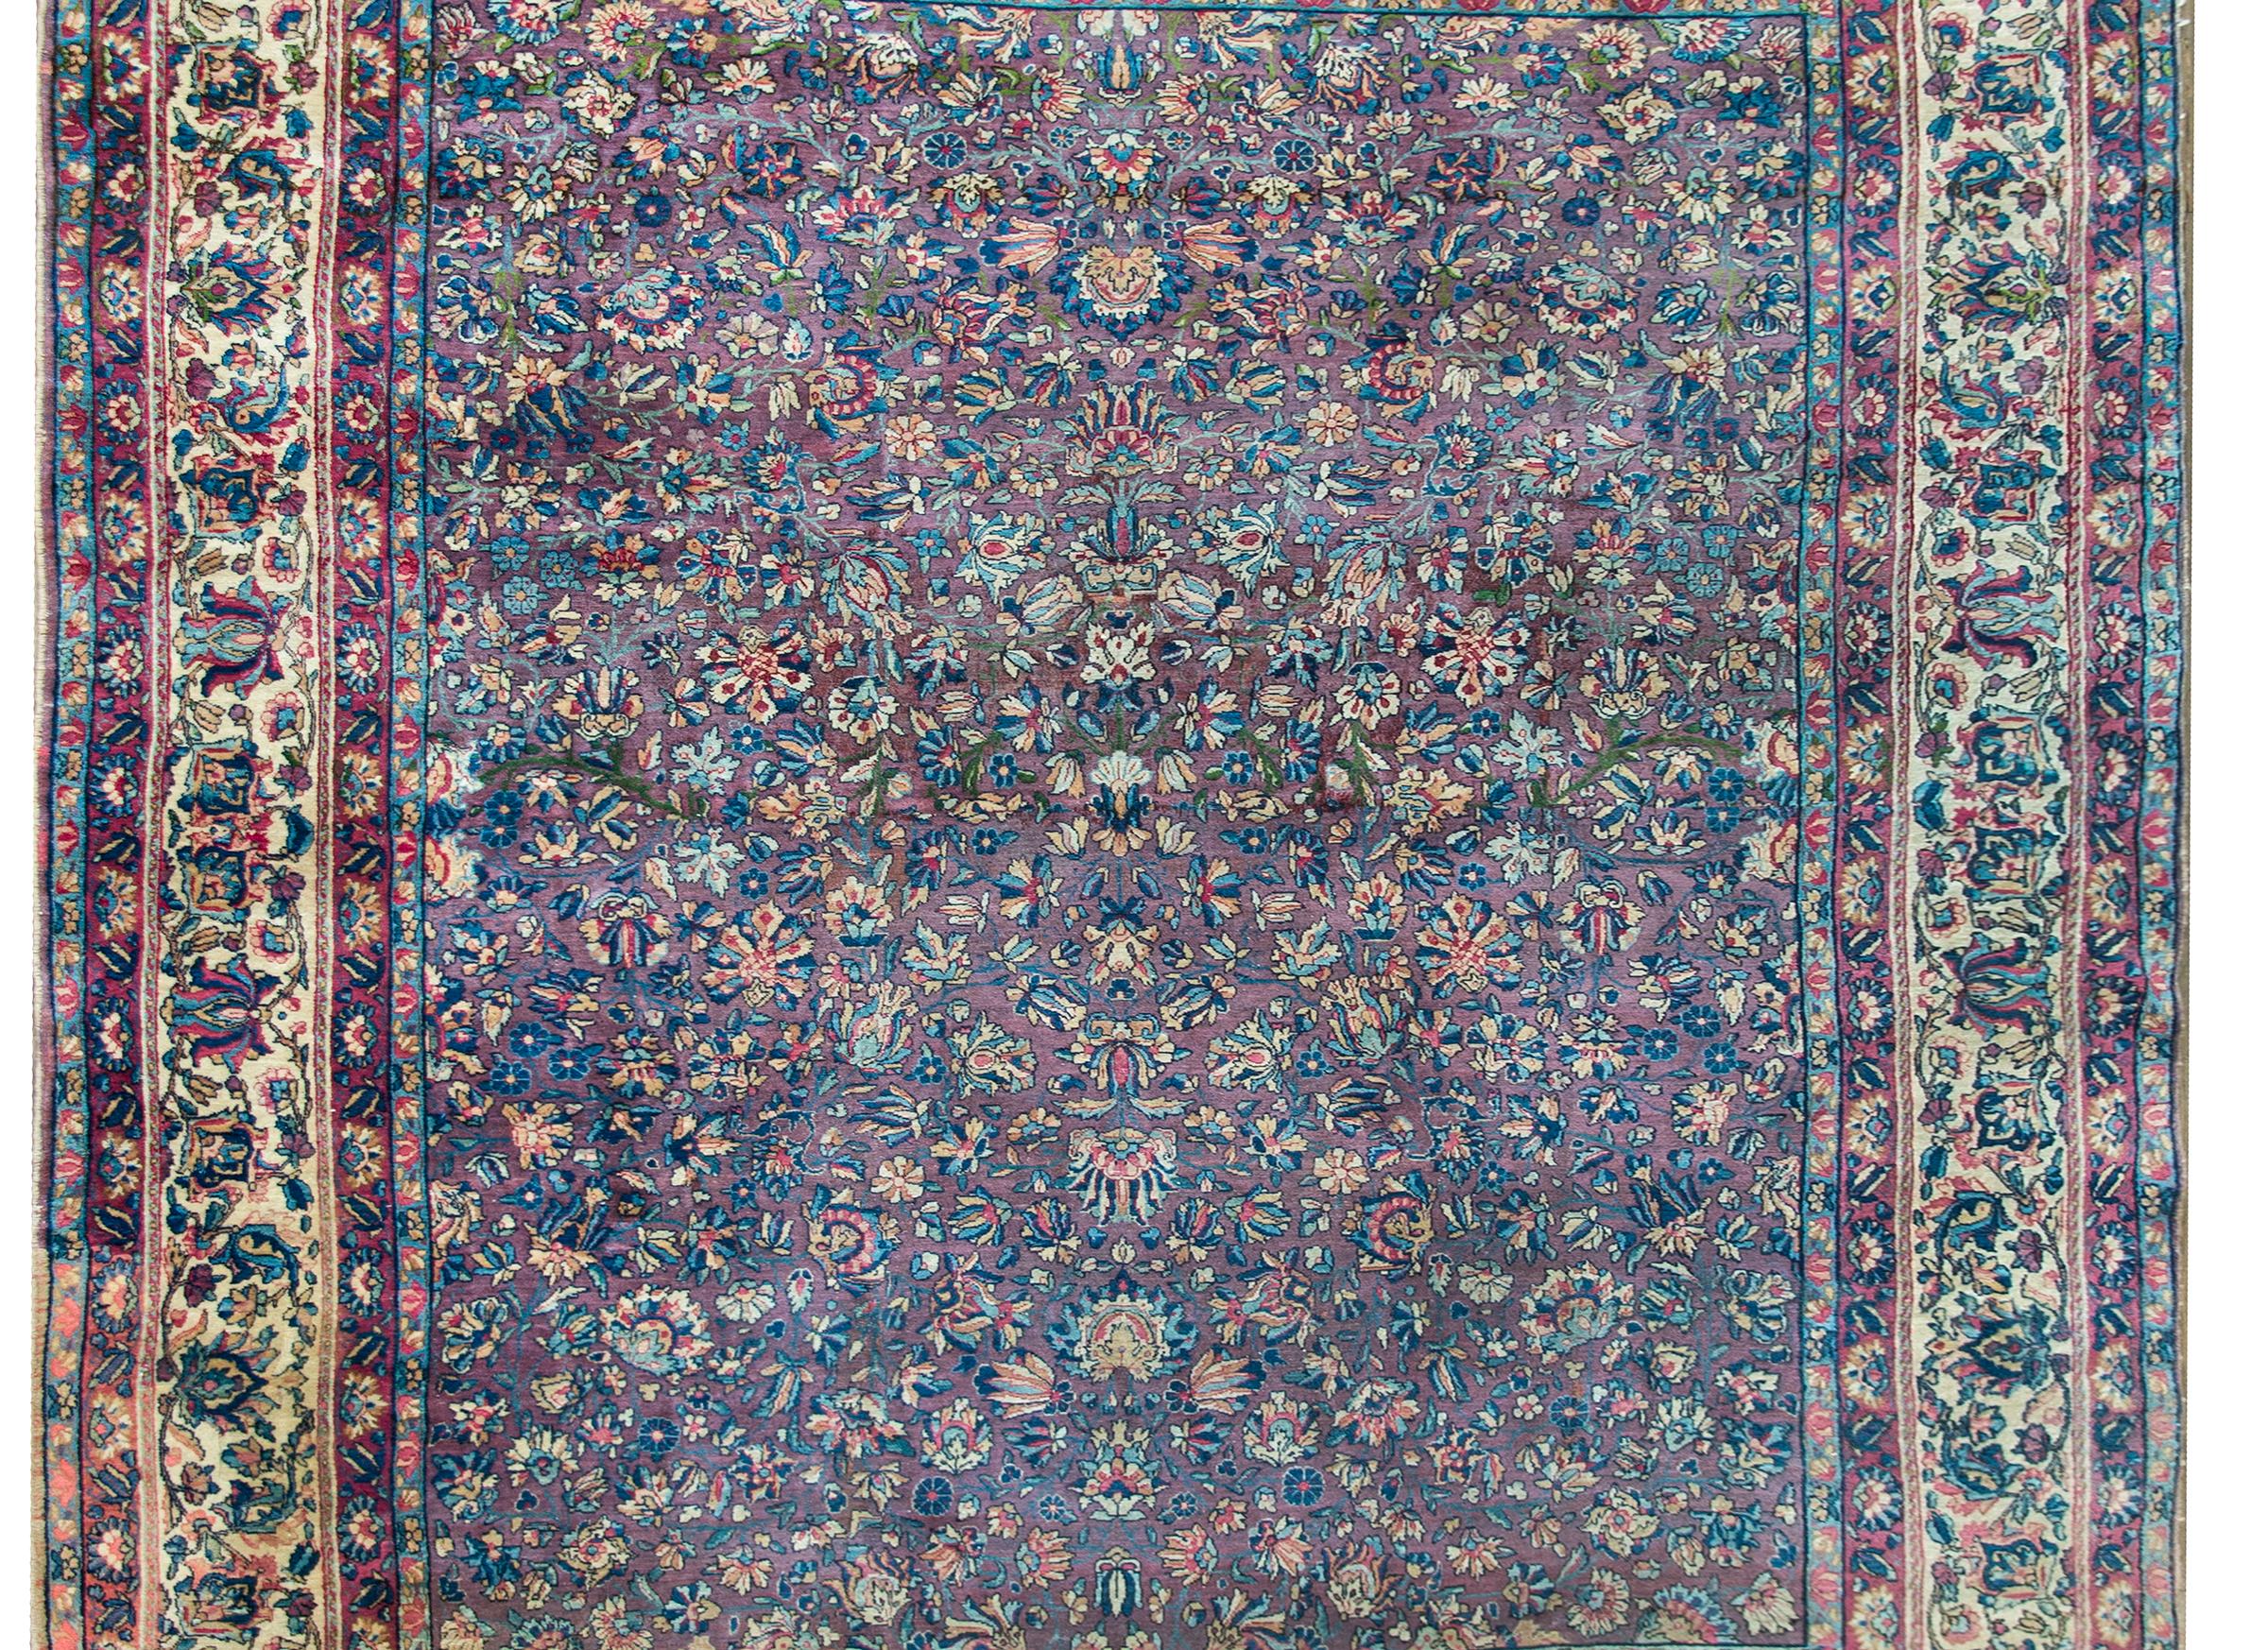 A striking early 20th century Persian Lavar Kirman rug with an all-over mirrored floral pattern with myriad flowers and leaves woven in brilliant light and dark indigo, white, orange, fuchsia, and set against a highly unusual violet background,